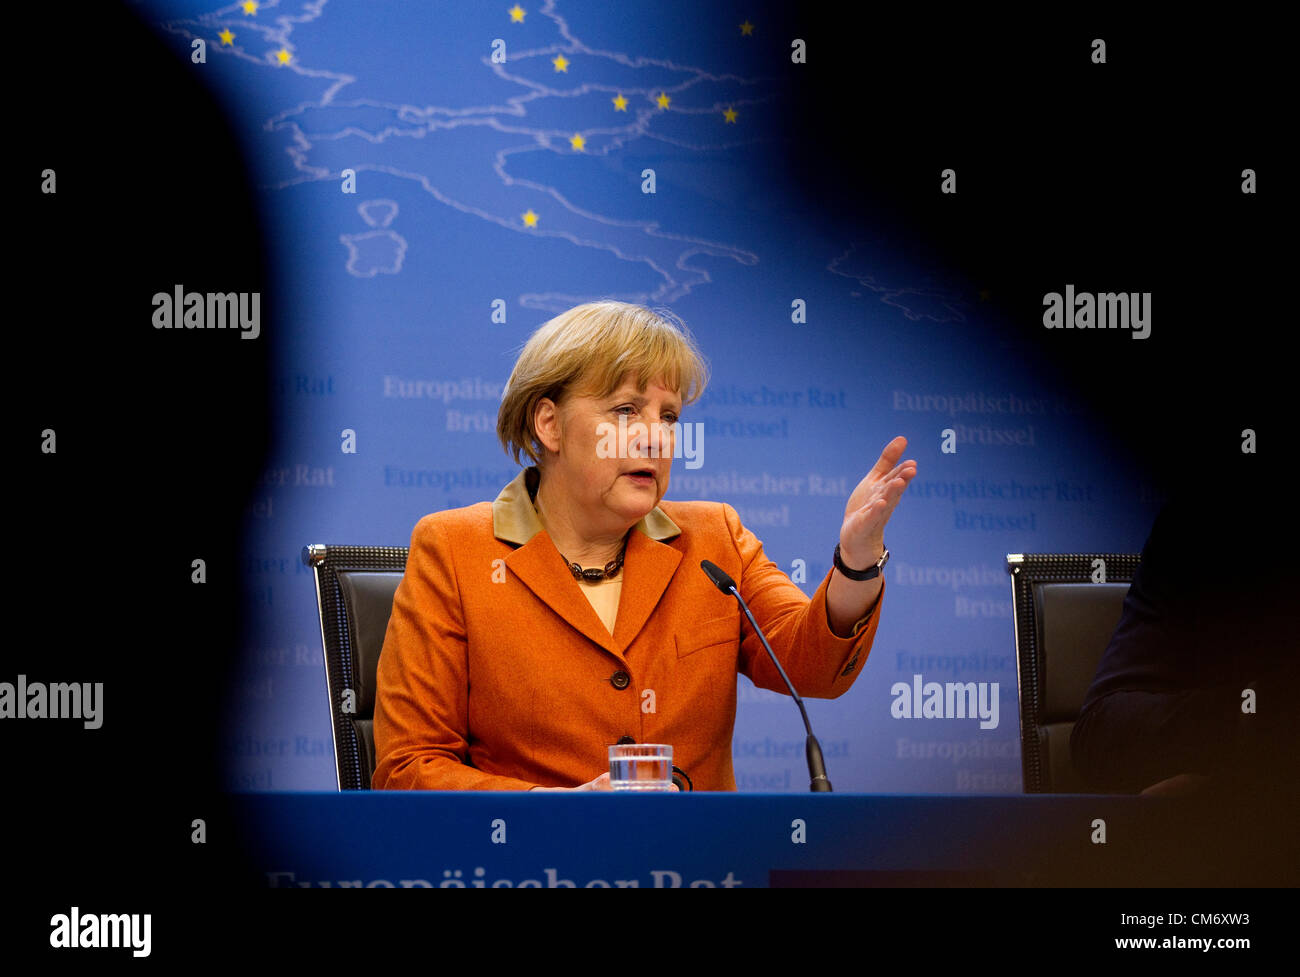 Brussels, Belgium, 19th October, 2012. Angela Merkel, Federal Chancellor of France gives a press briefing in the early hours of Friday morning at the European Council meeting in Brussels, Justus Lipsius Building. Photo:Jeff Gilbert. 19.10.2012. Brussels, Belguim. Stock Photo